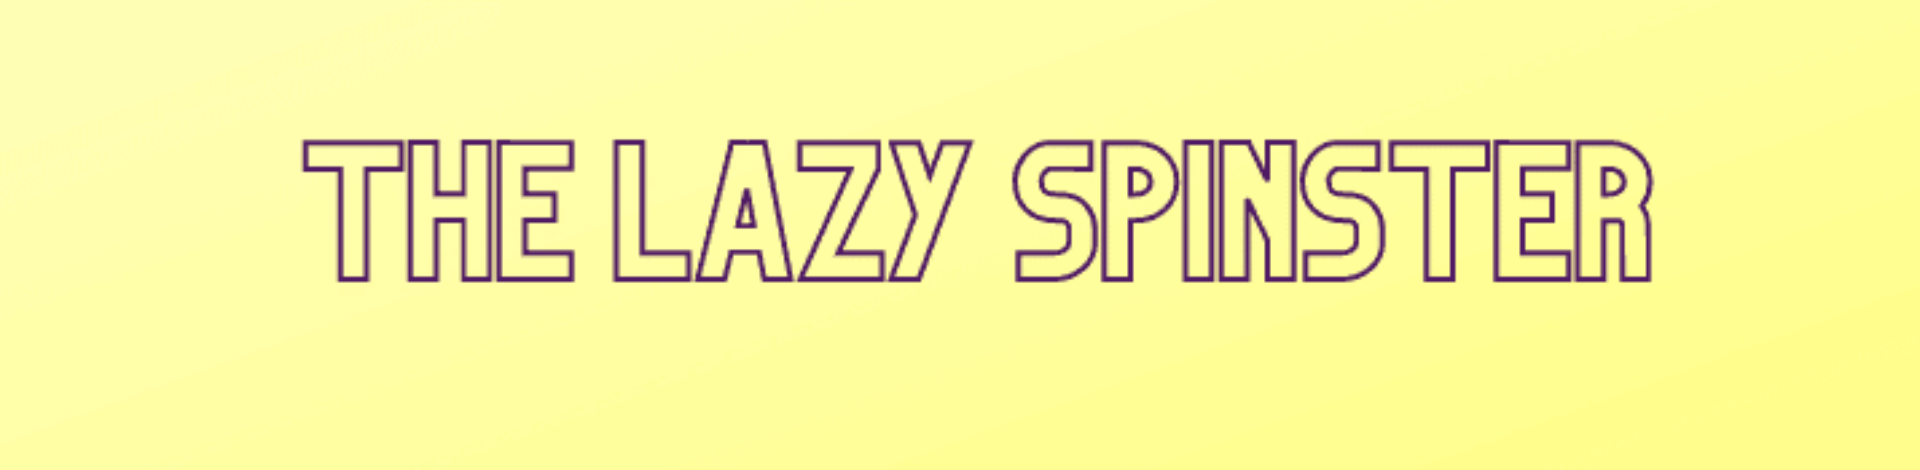 The Lazy Spinster